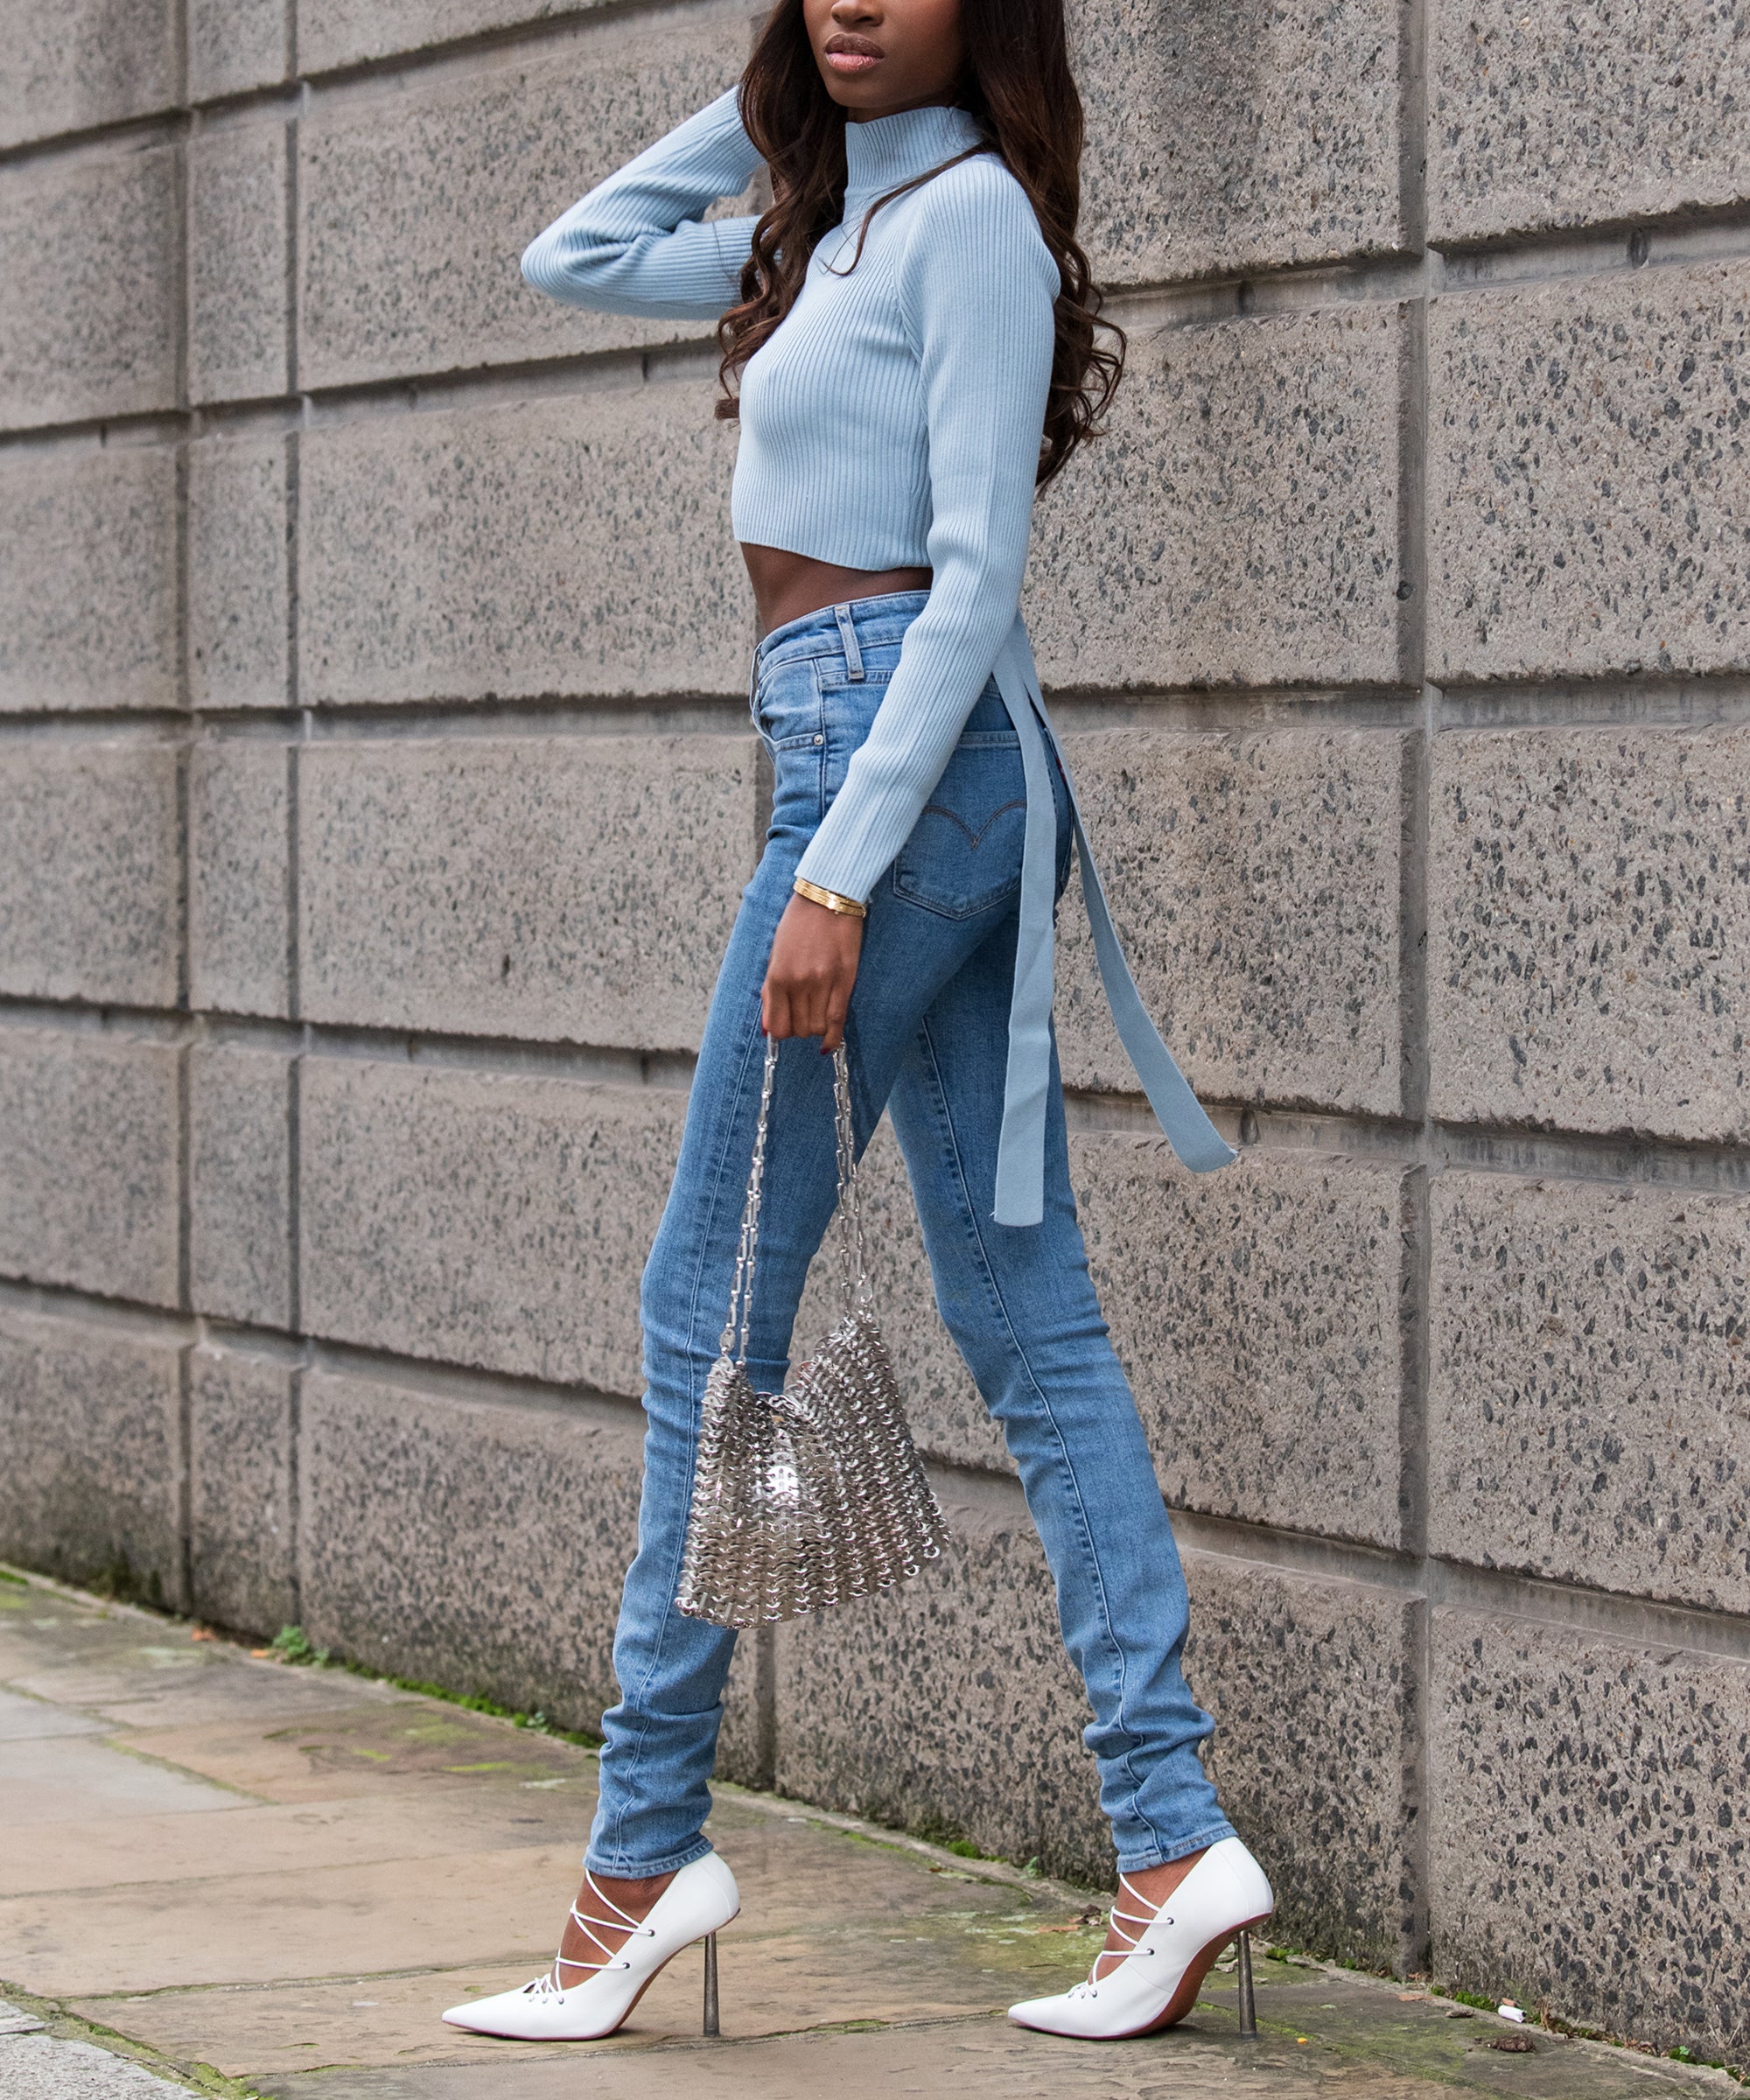 Best Shoes to Wear With Skinny Jeans Outfits Story - ShoeTease Shoe Blog &  Styling Advice